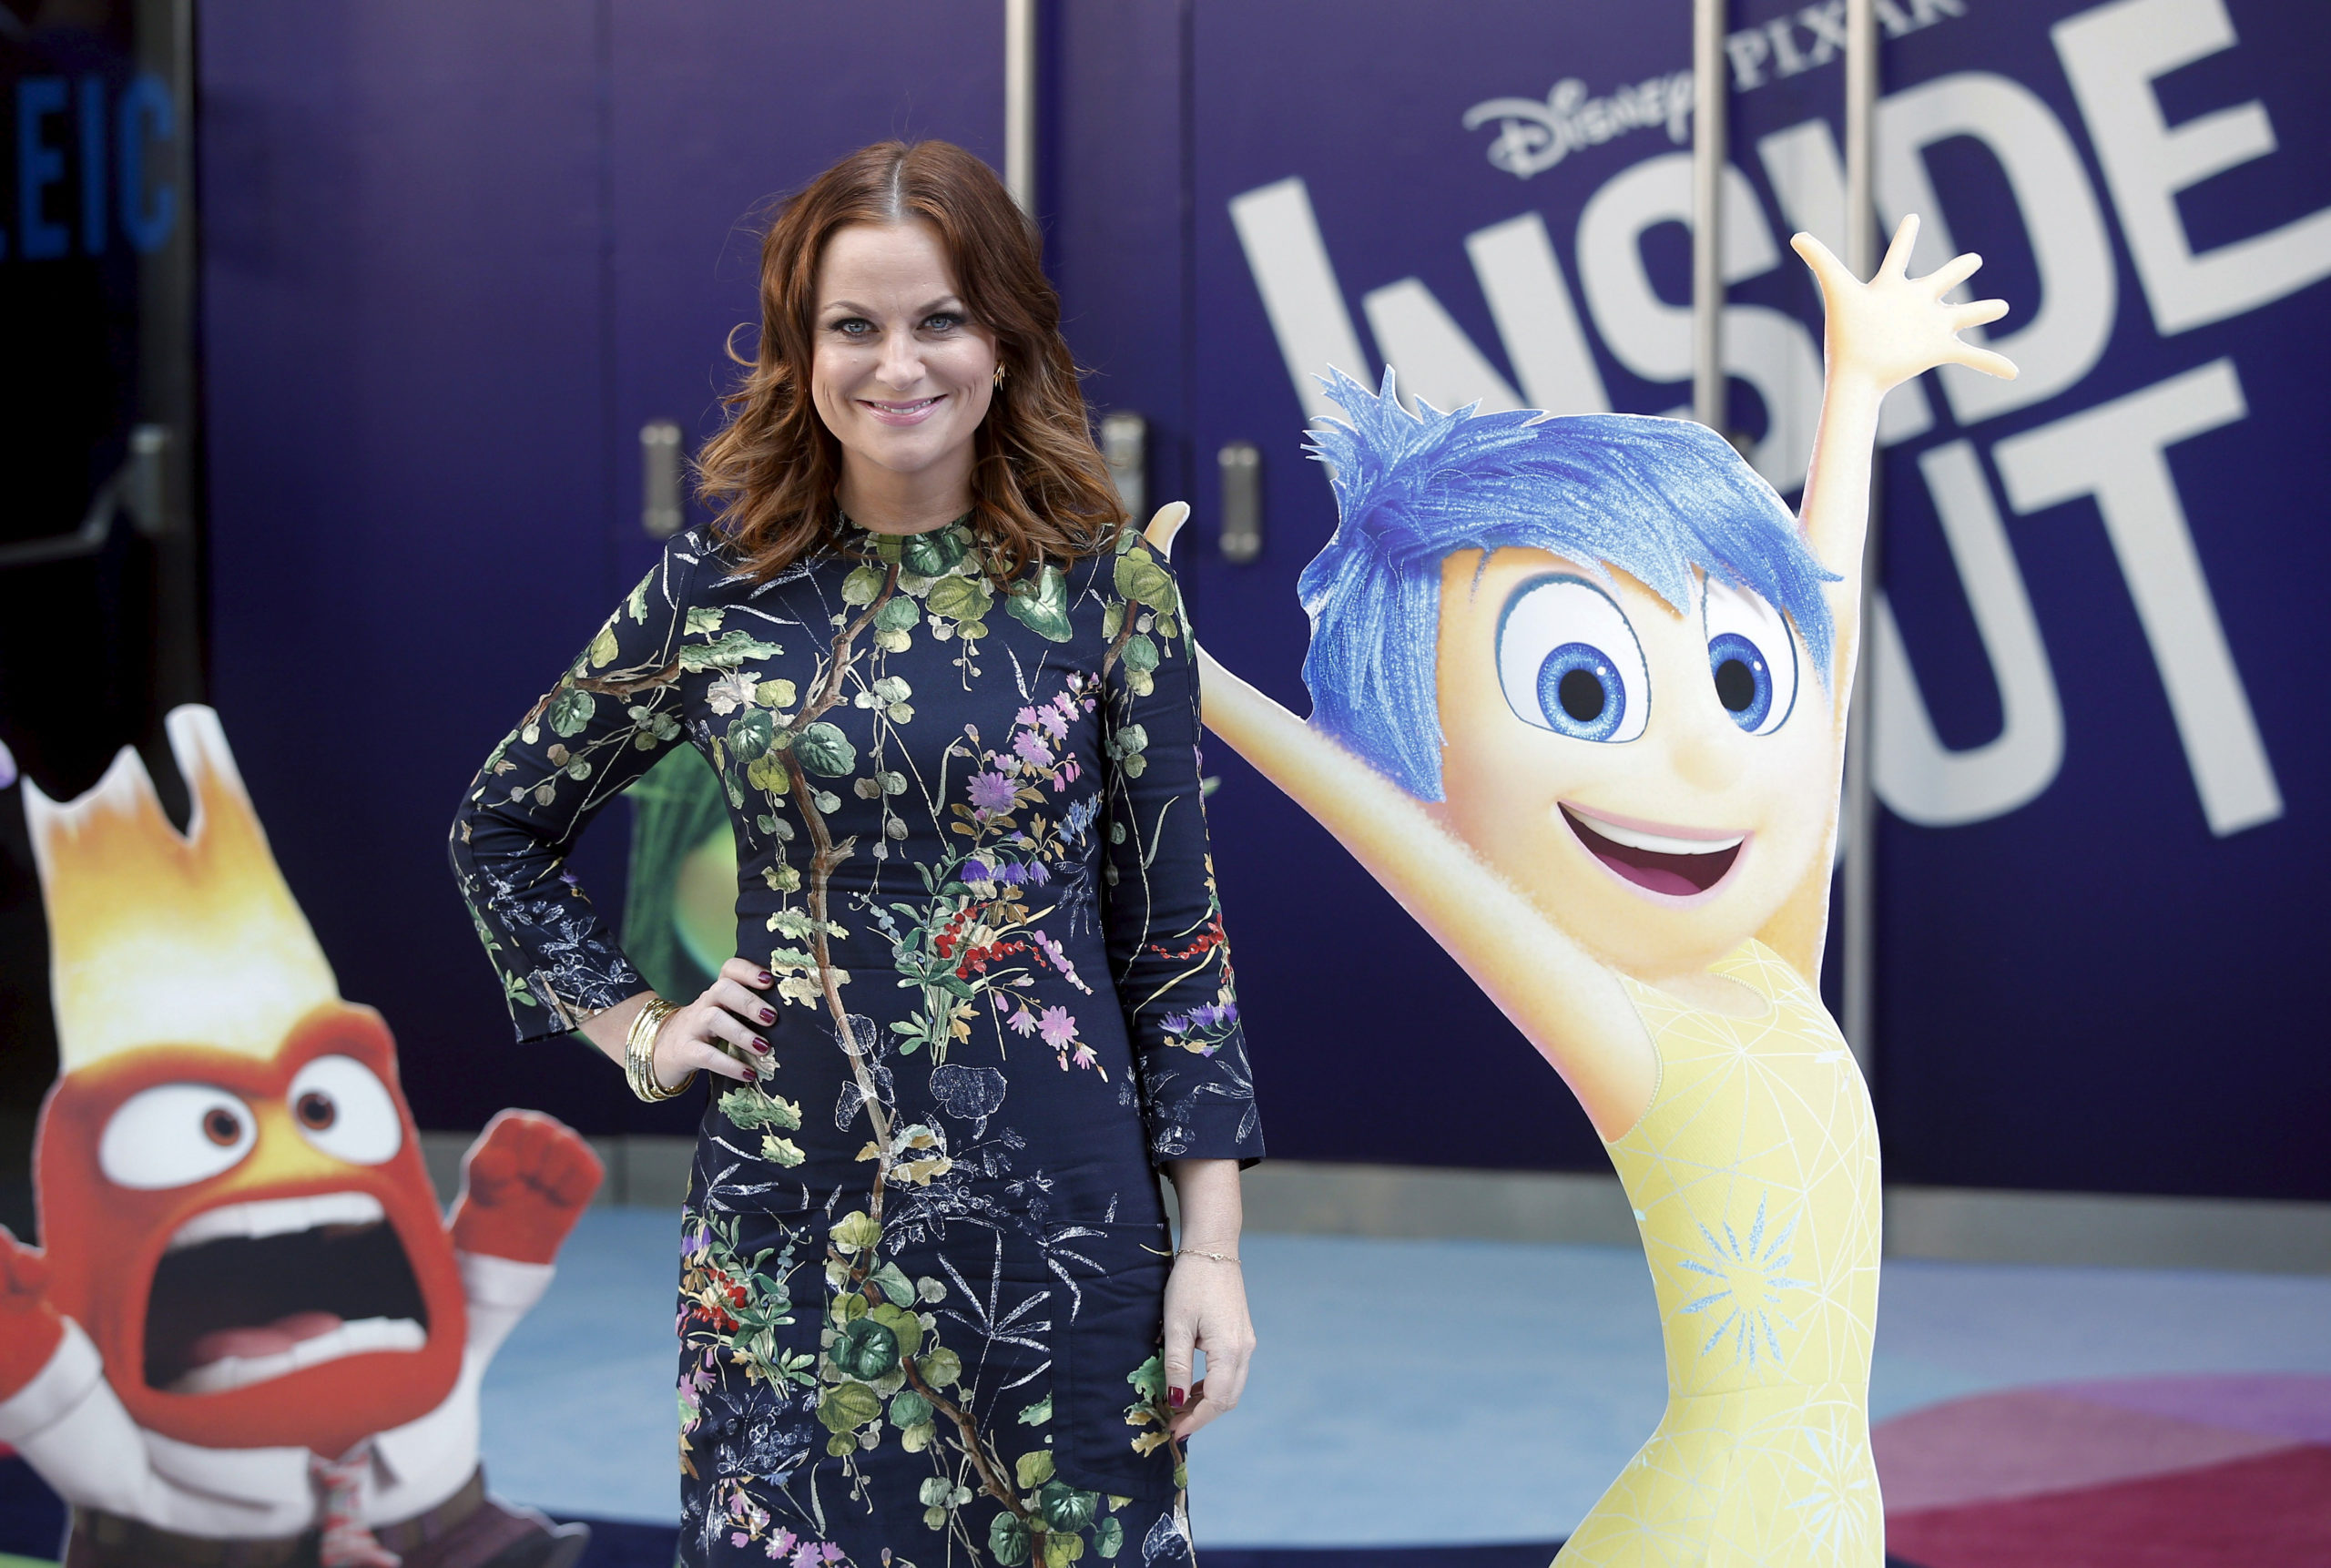 Cast member Amy Poehler, who voiced 'Joy' in the Disney-Pixar film "Inside Out" arrives for its UK Gala screening at the Leicester Square Odeon in London, Britain, July 19, 2015.  REUTERS/Peter Nicholls/File Photo